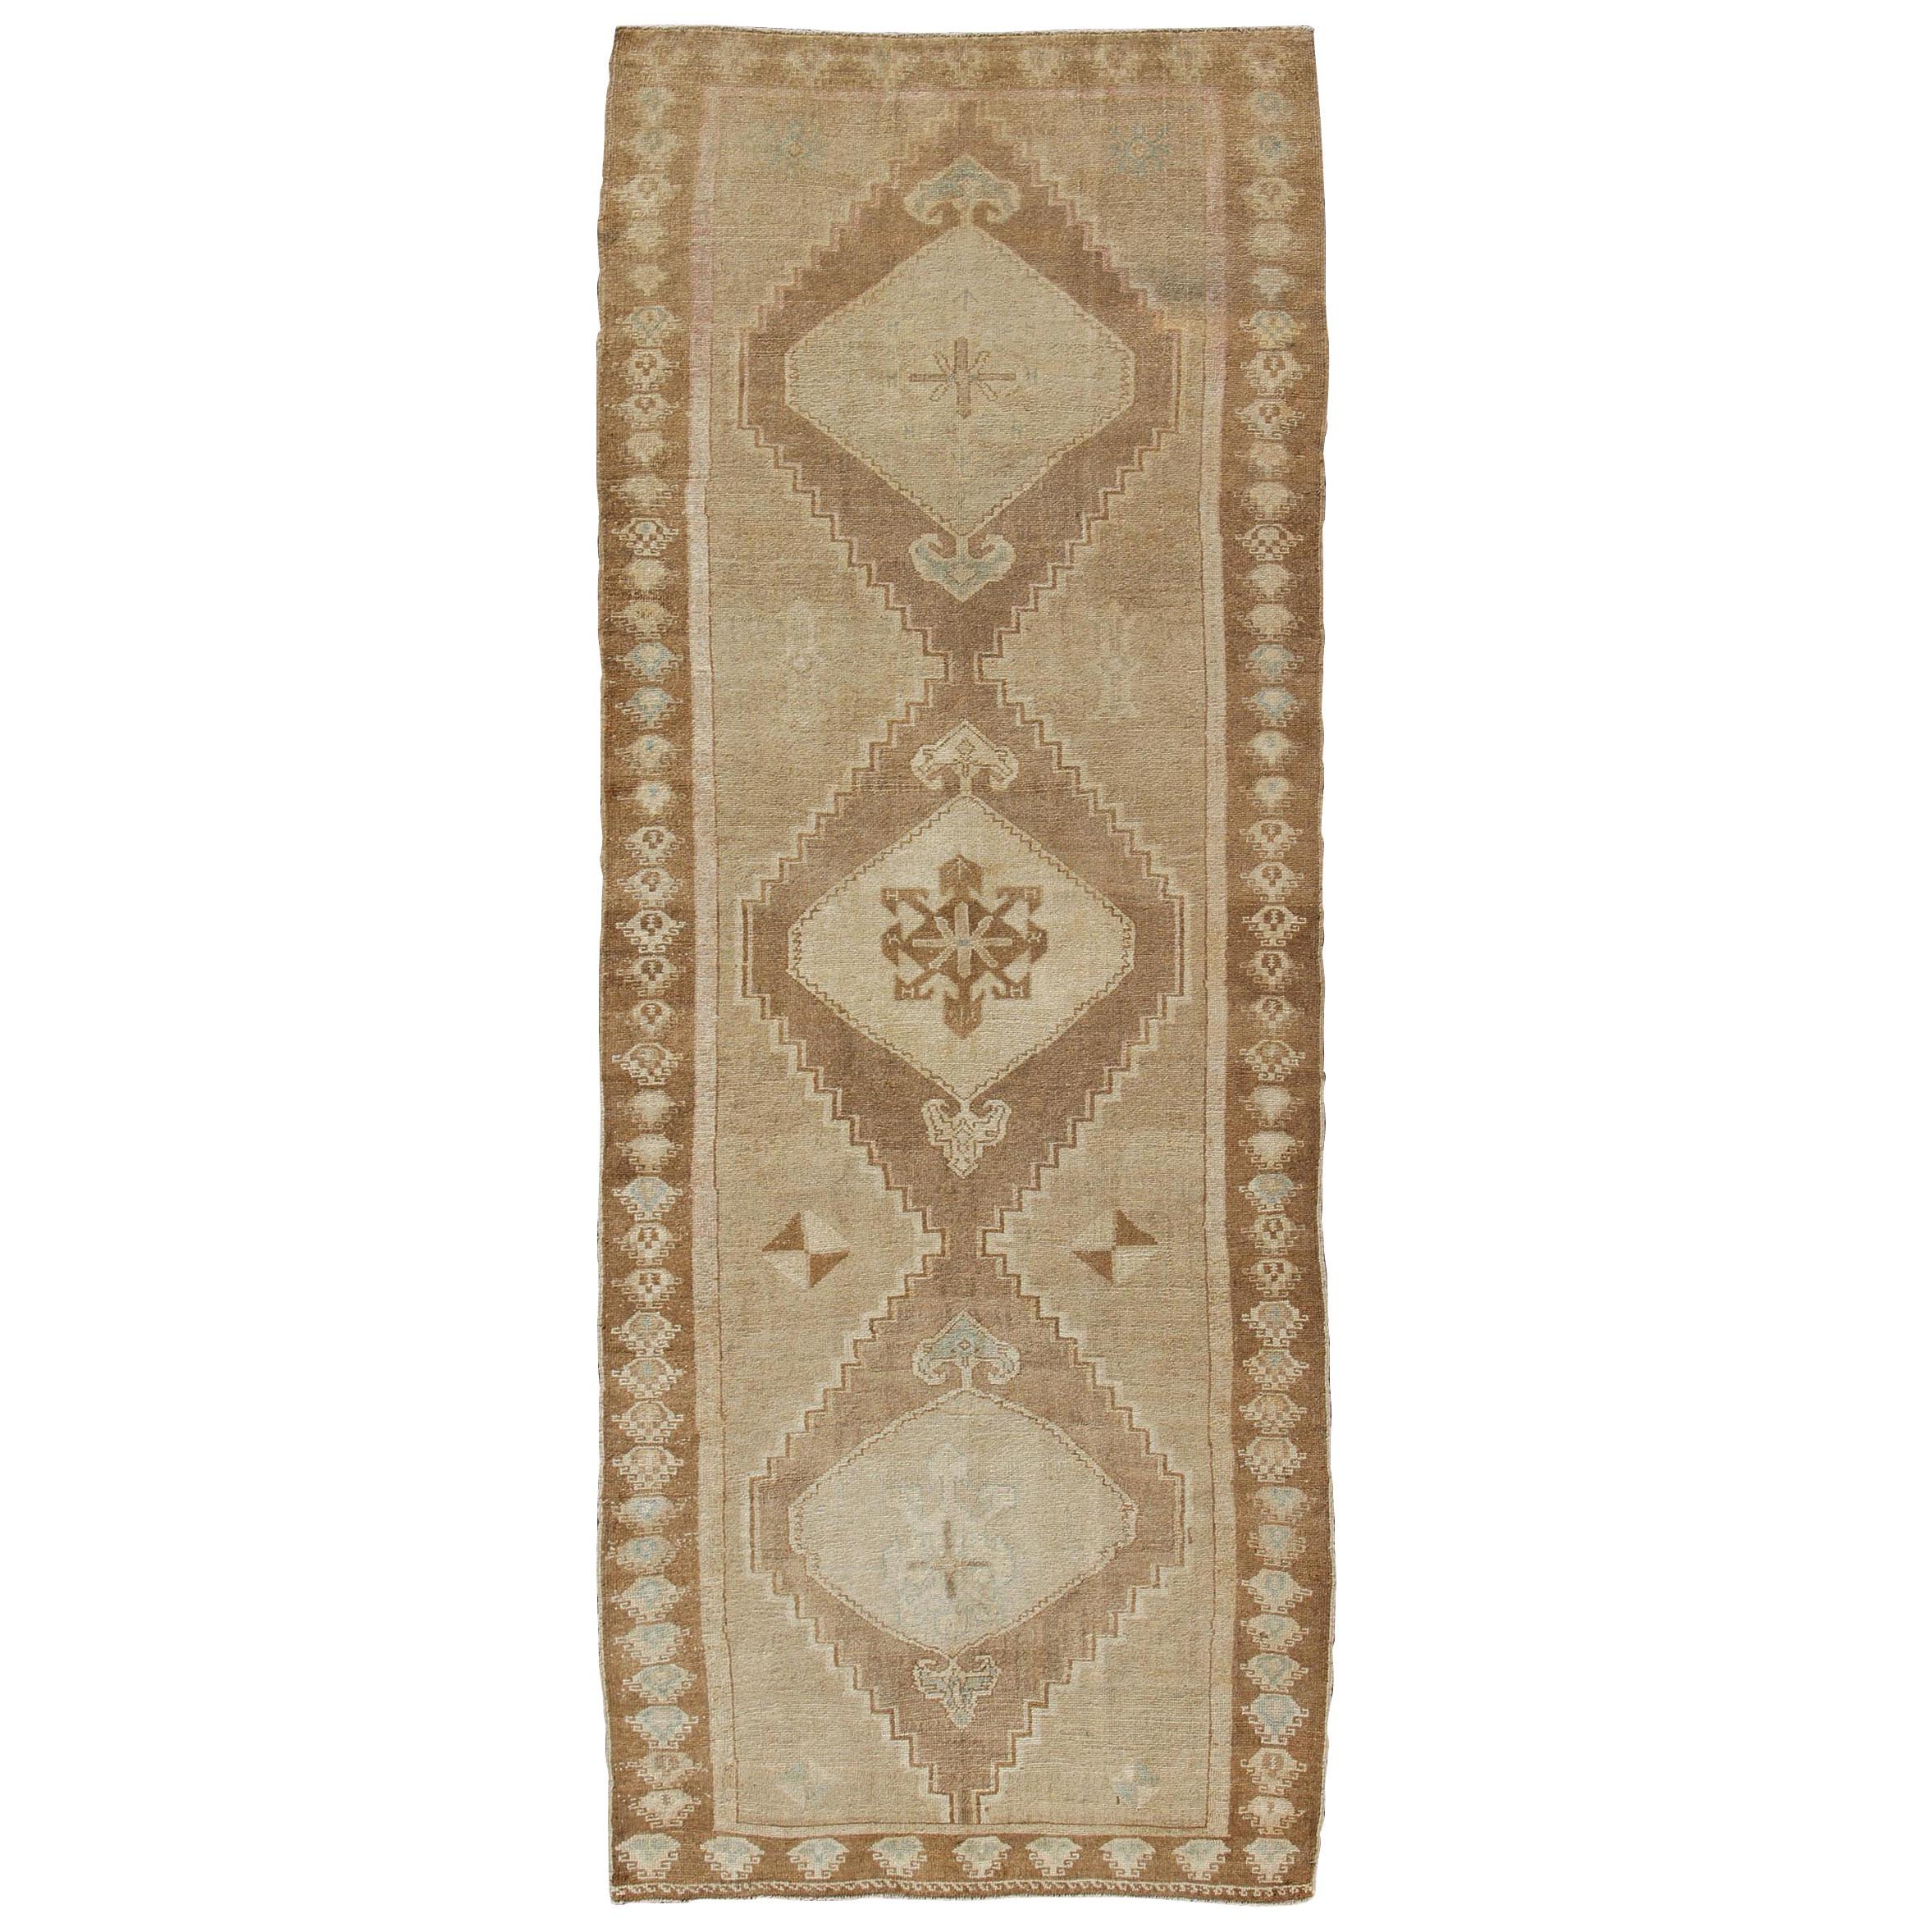 Large Gallery Turkish Rug in Earth Tones, Light Brown with Three Medallions